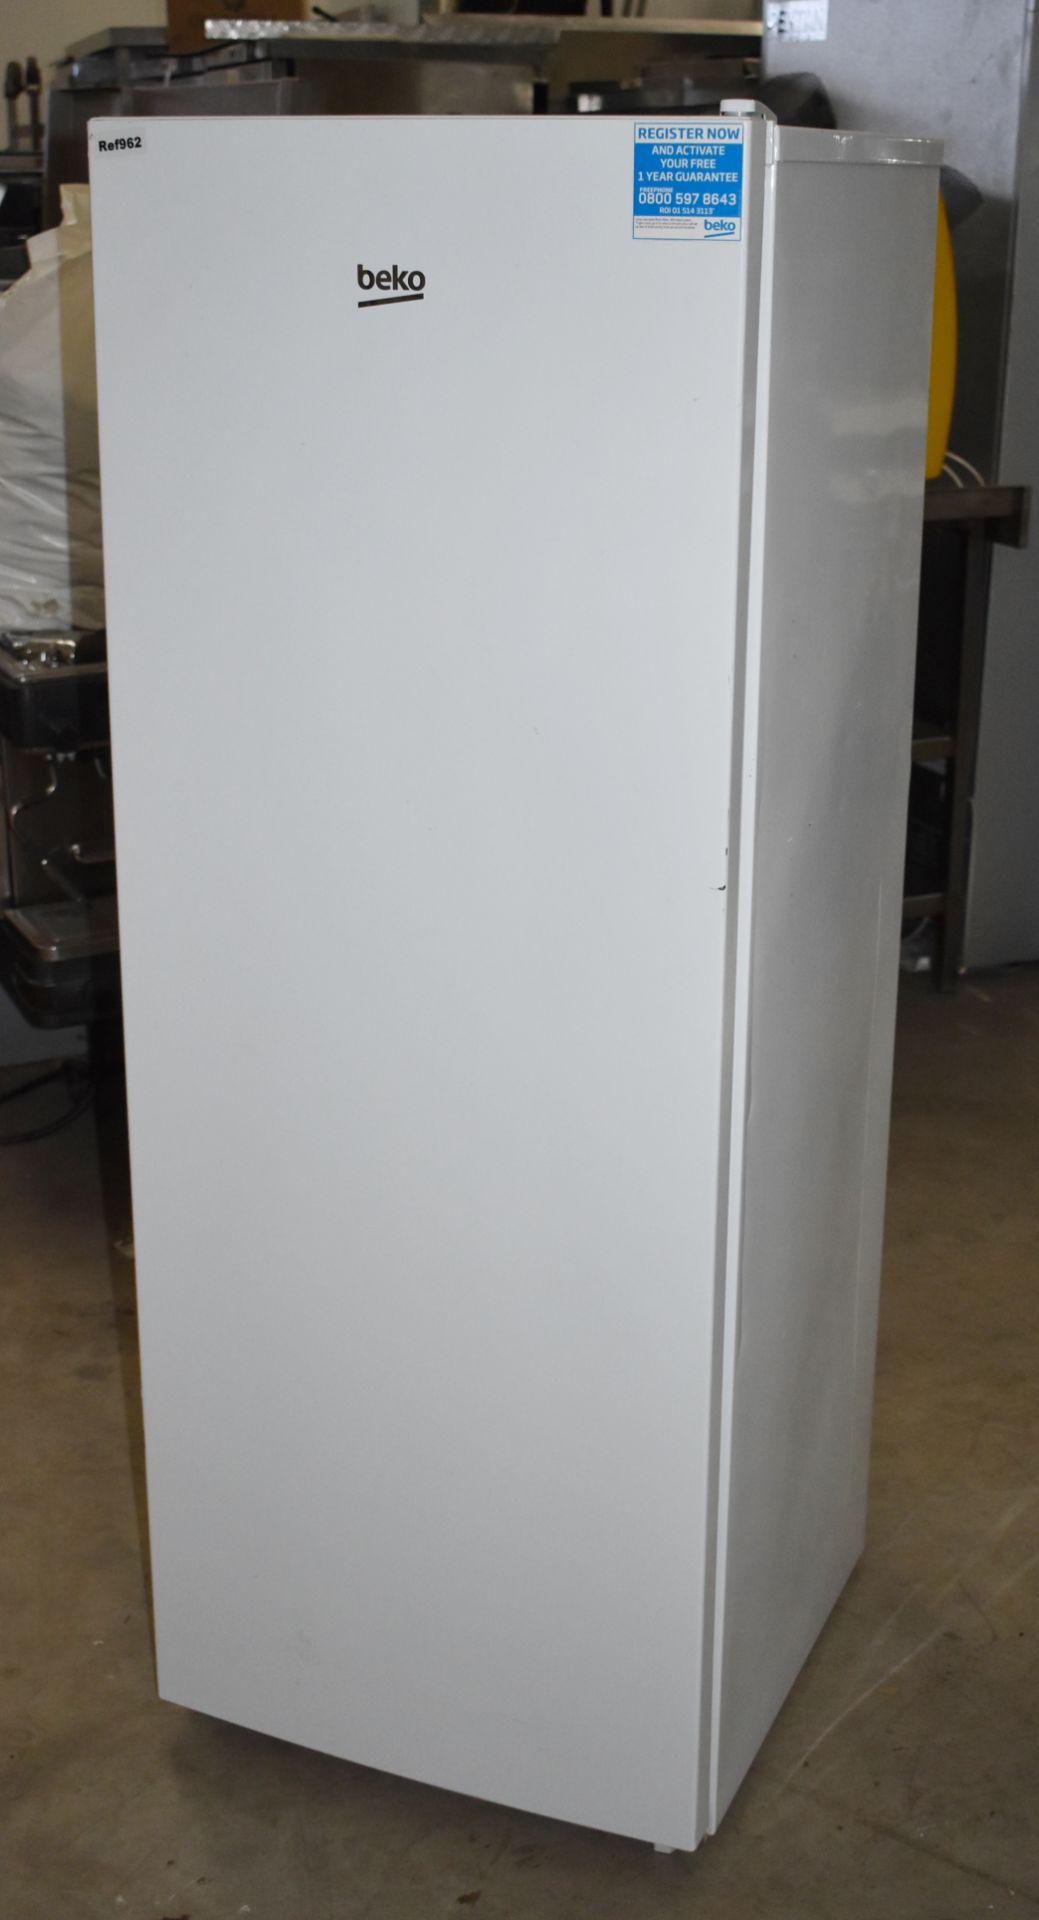 1 x Beko LSG1545W Upright Fridge - Excellent Clean Condition With User Manual and Accessories -